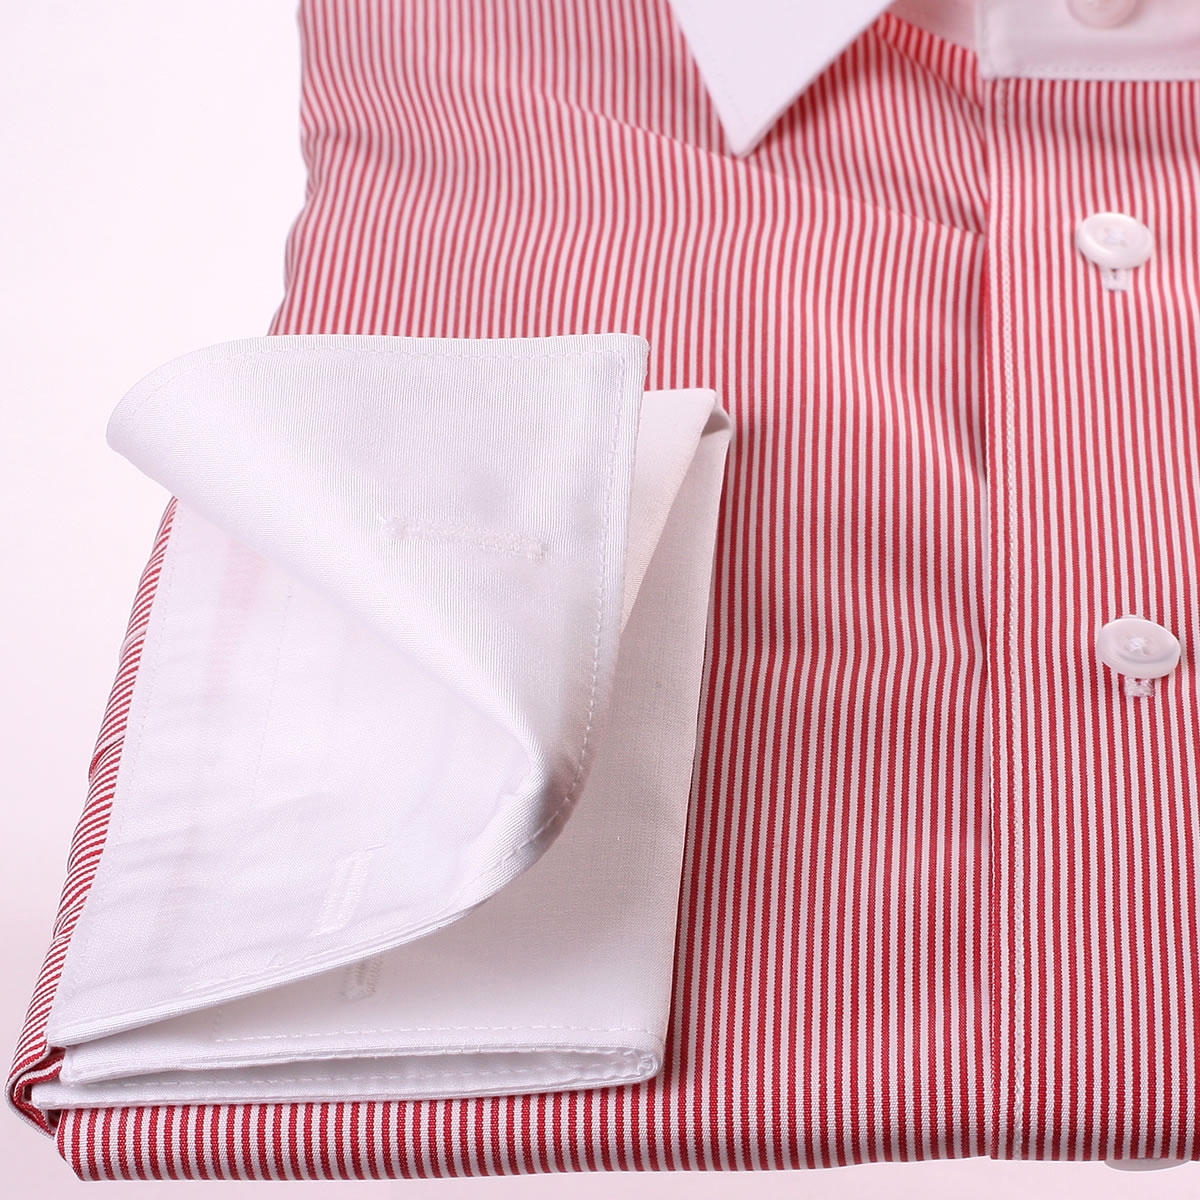 White and red stripes french cuff shirt with white collar and cuffs